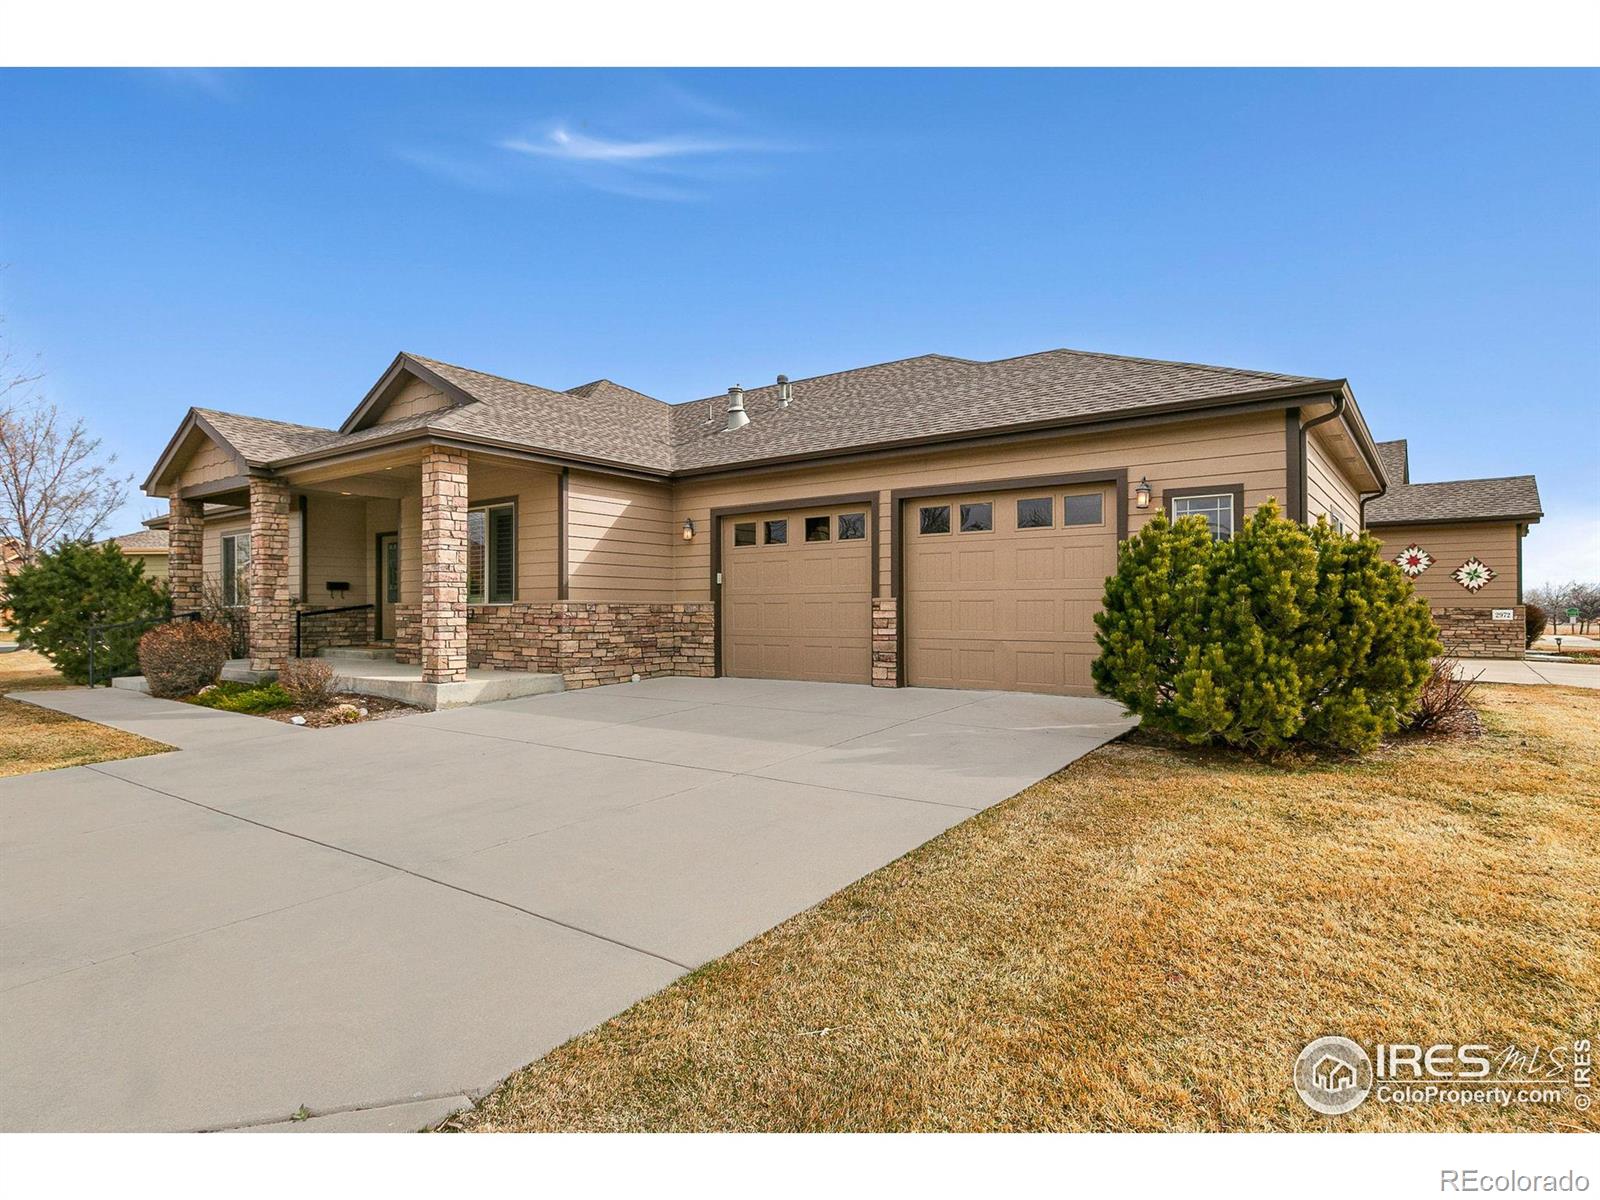 2958  purgatory creek drive, Loveland sold home. Closed on 2024-04-18 for $656,000.